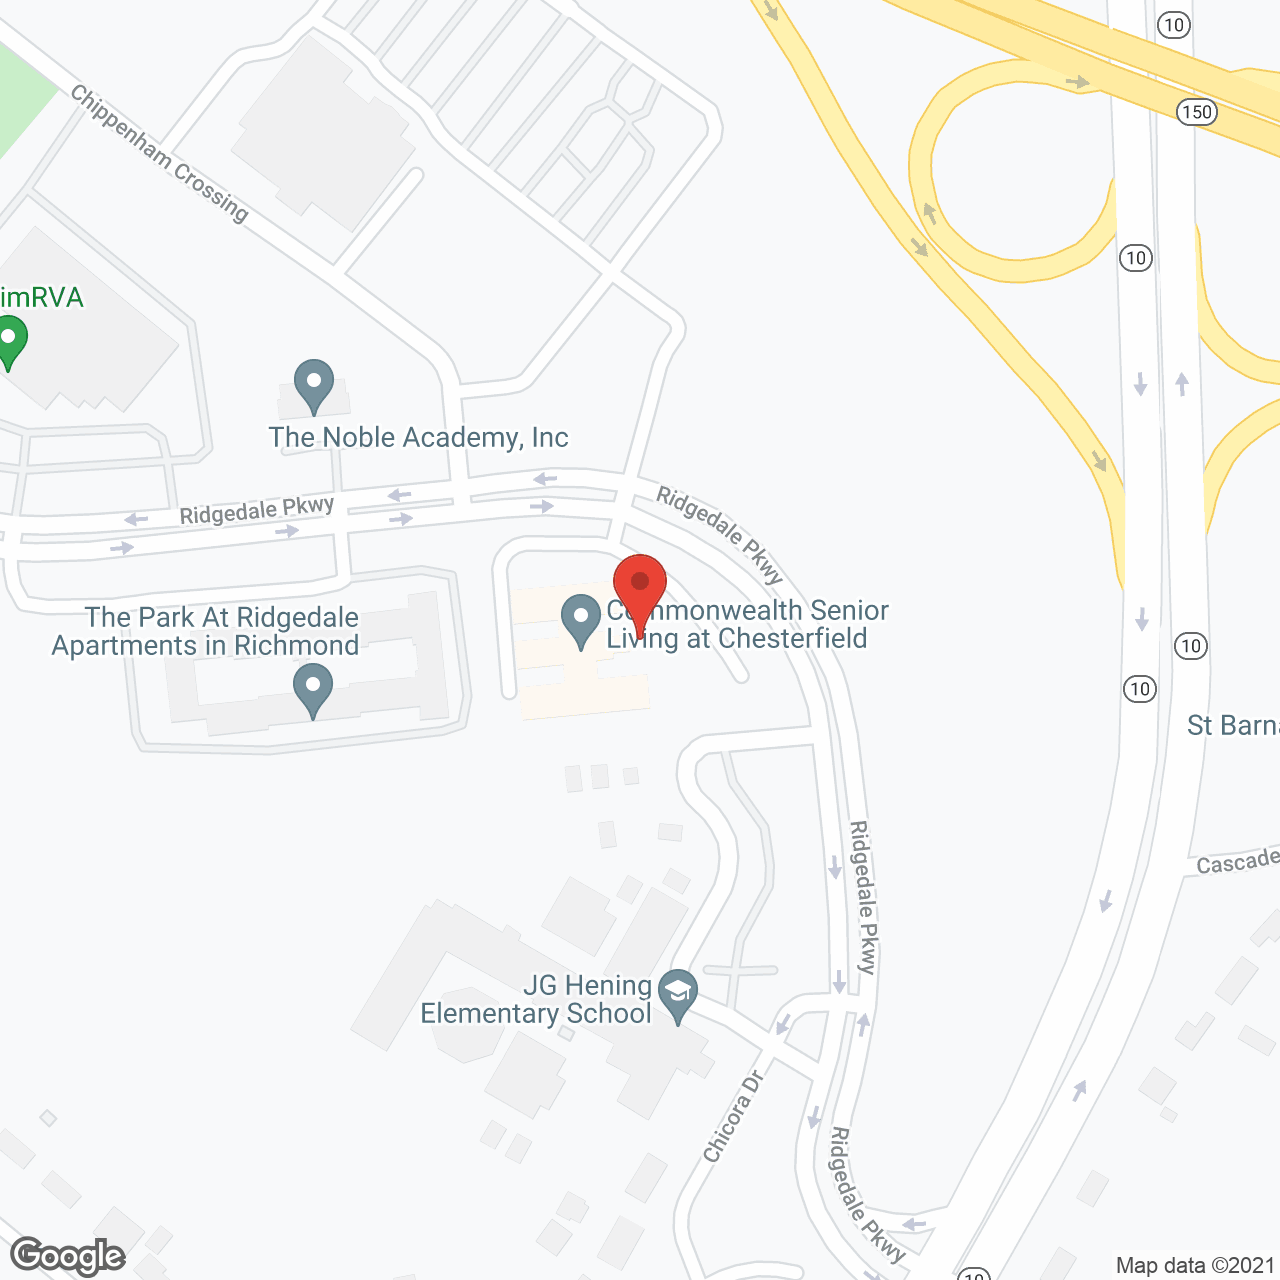 Commonwealth Senior Living at Chesterfield in google map